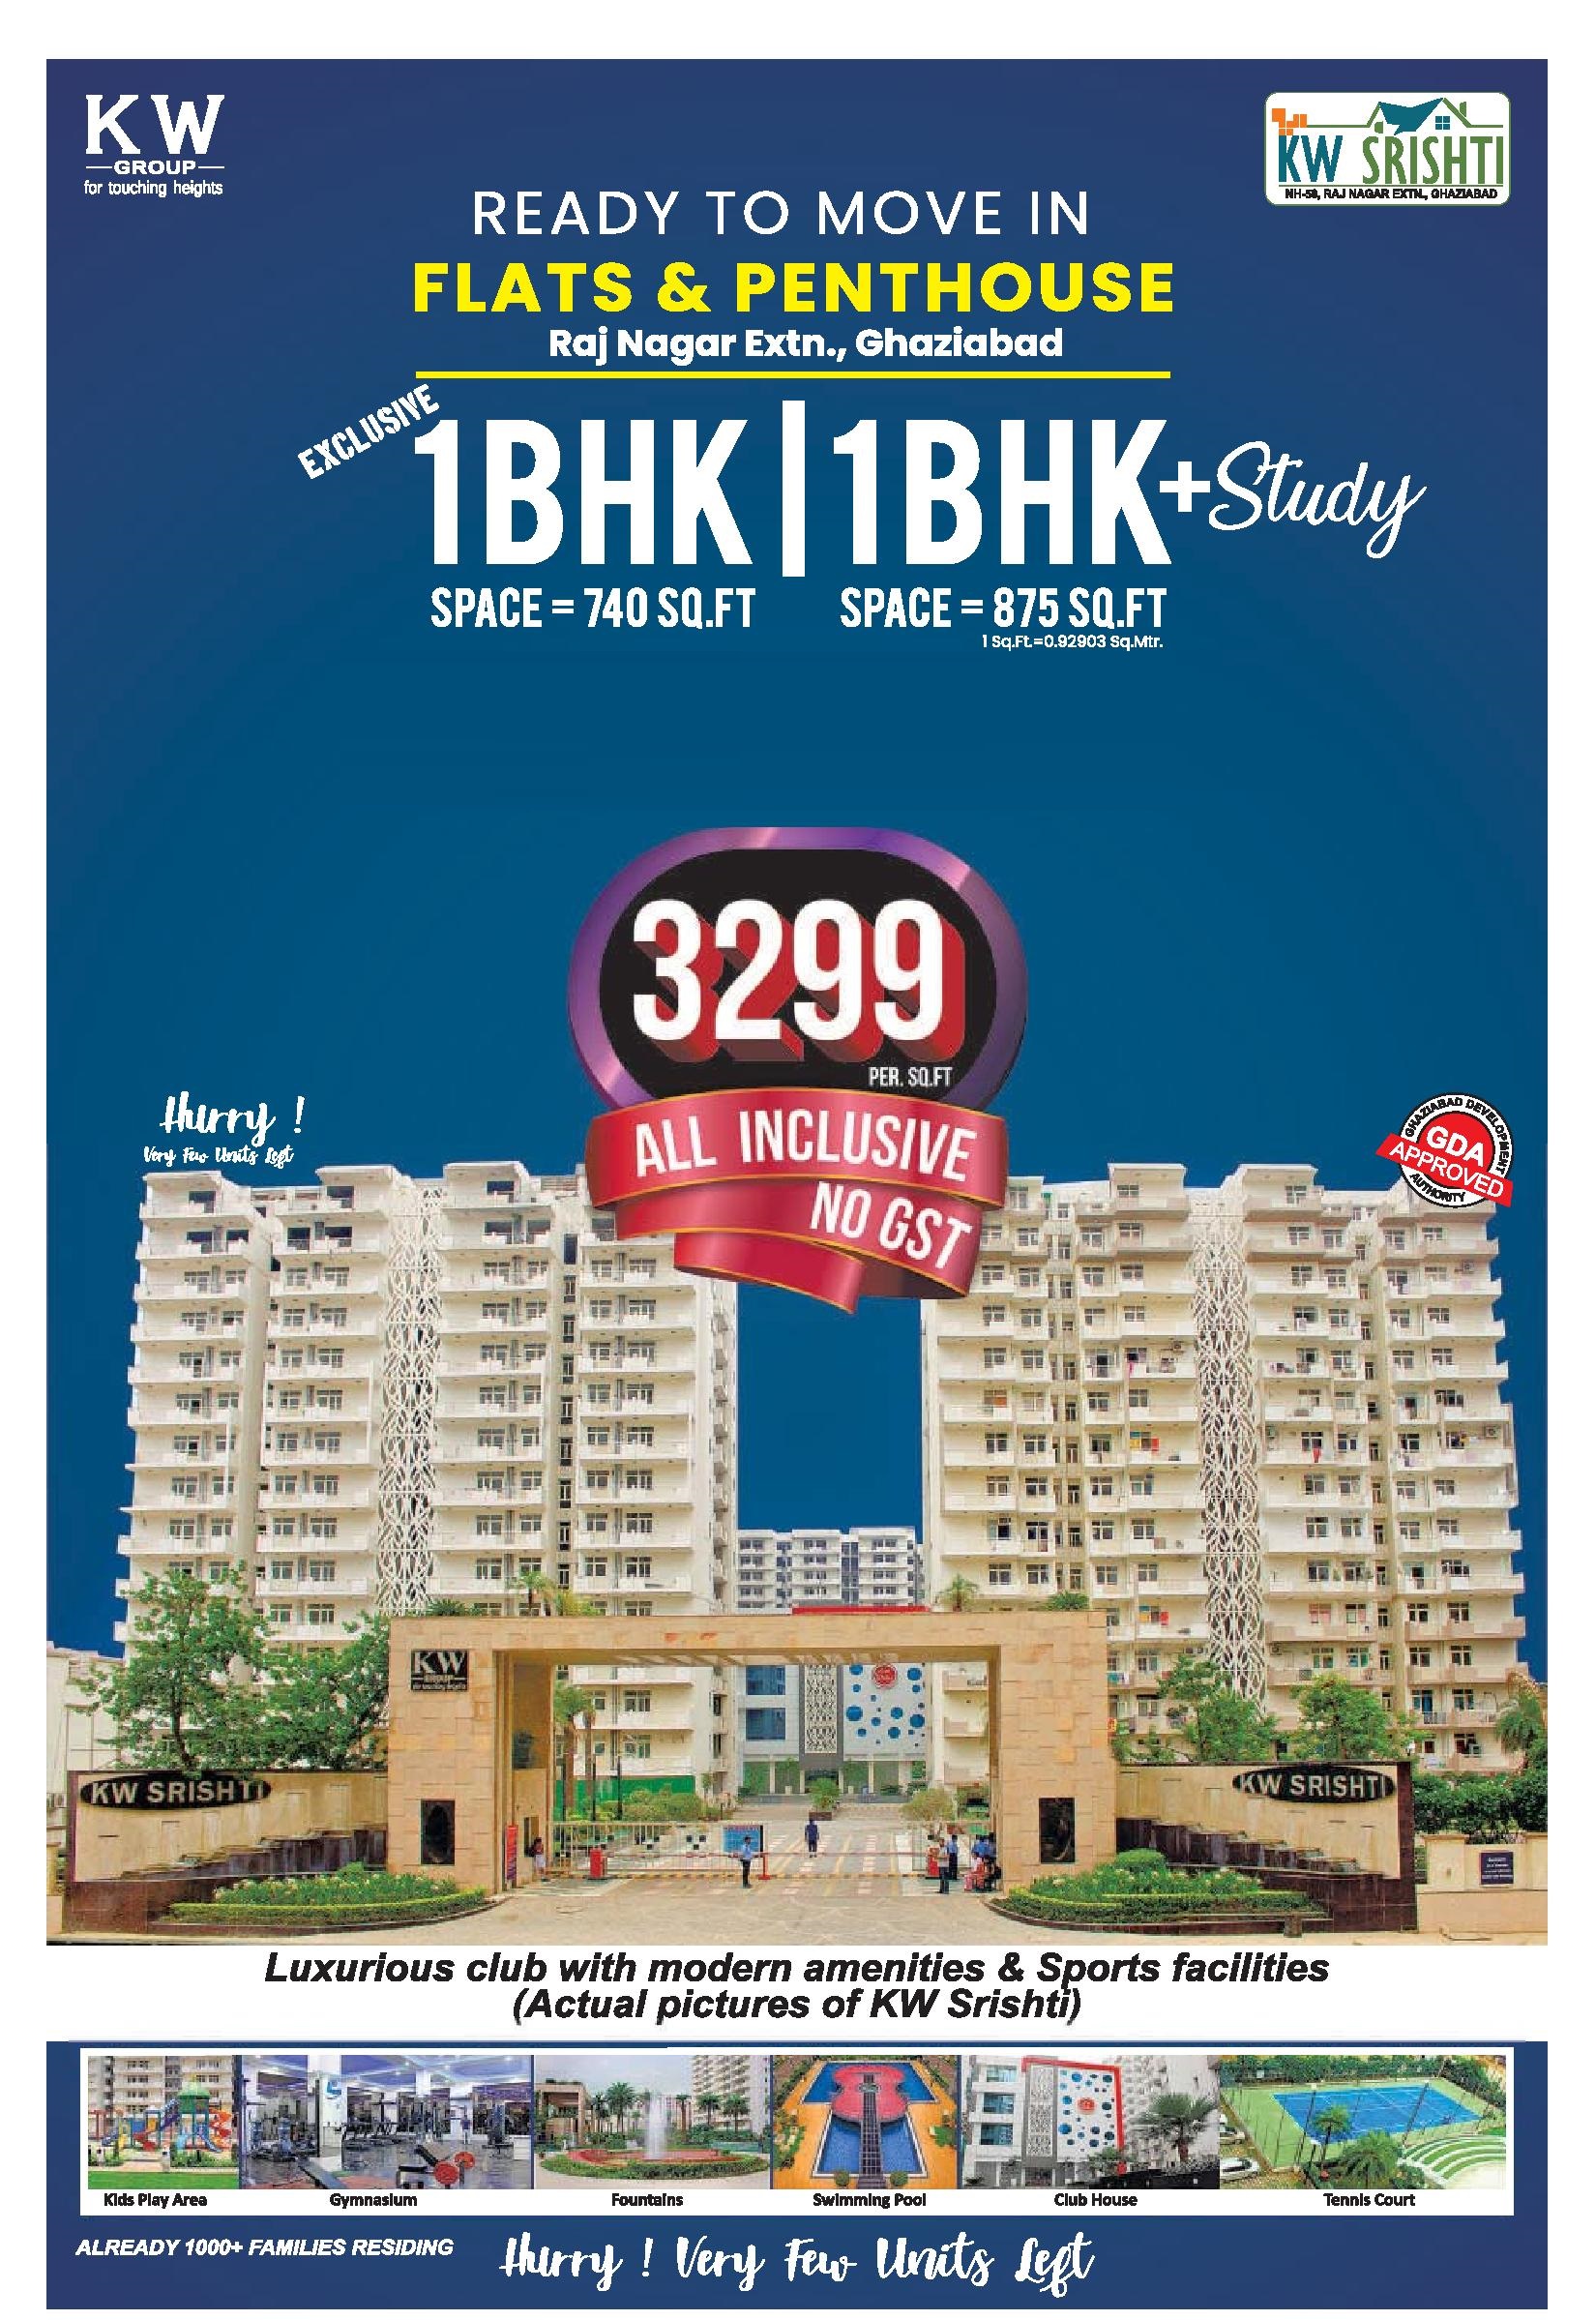 Ready to move in flats & pent houses at KW Srishti in Ghaziabad Update